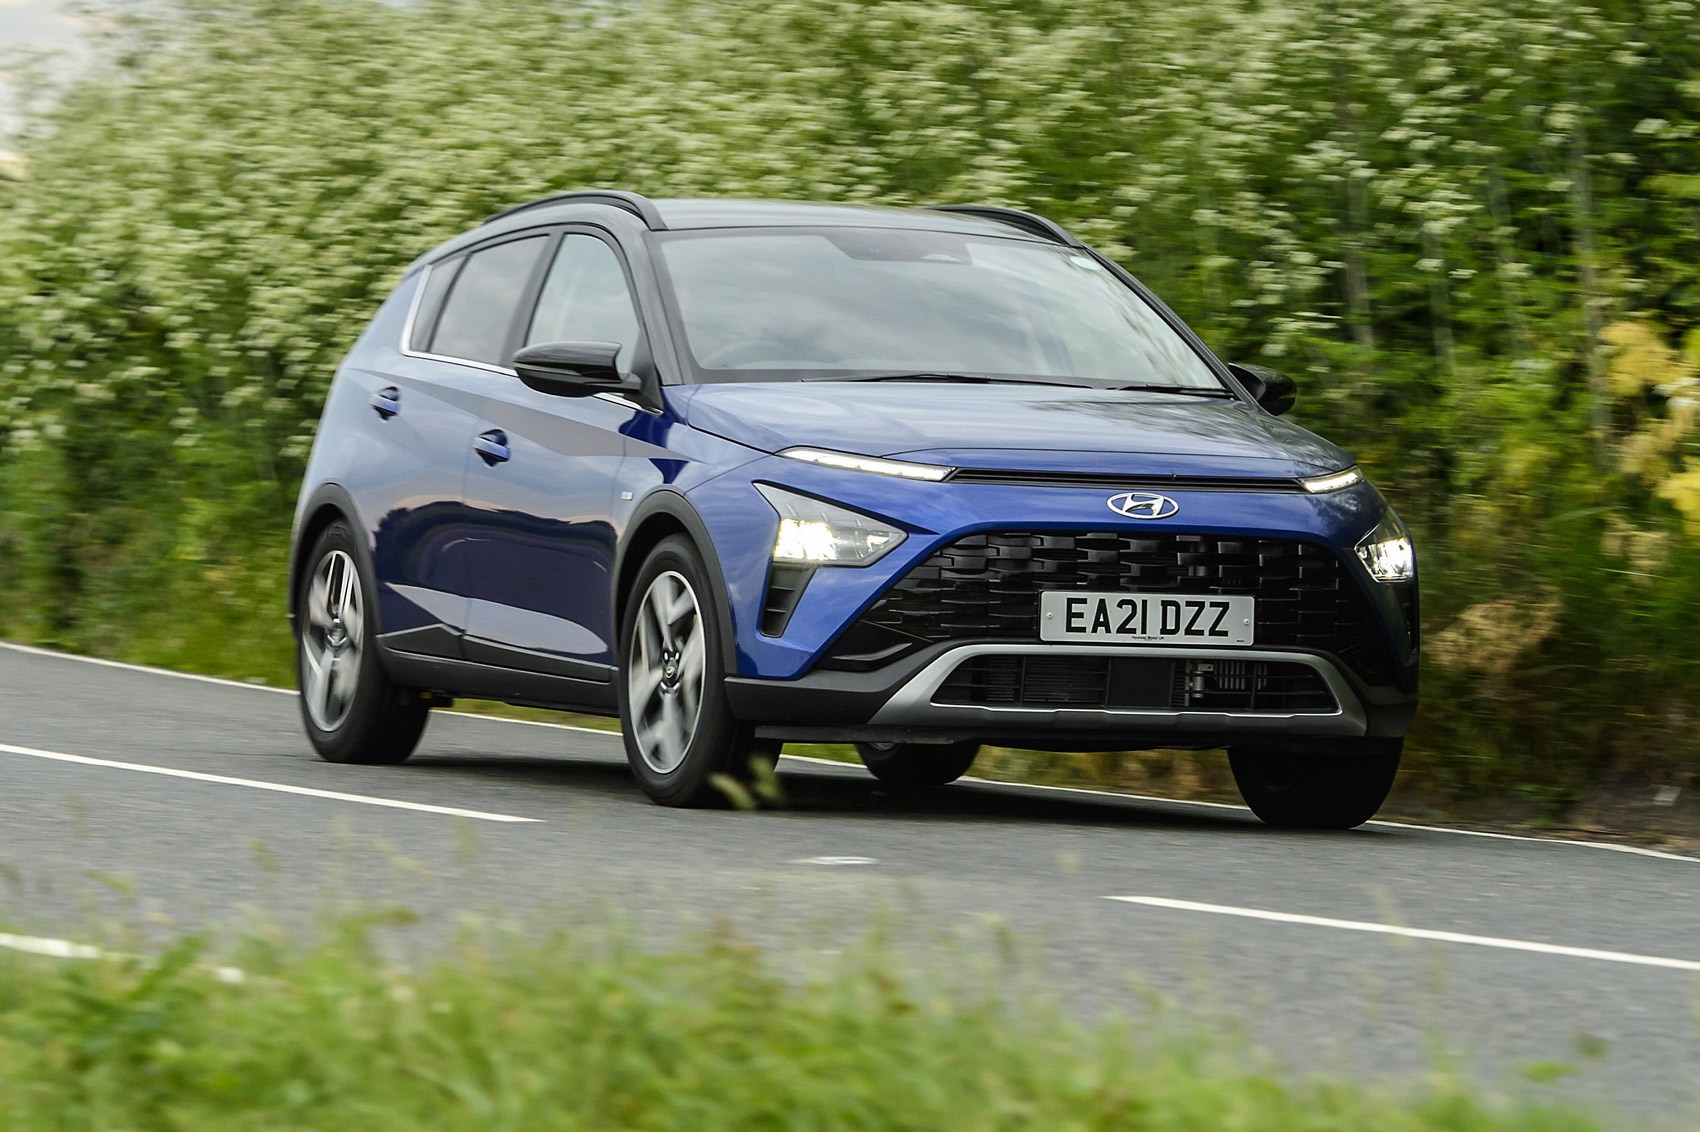 Motoring Review: Little and large from new Hyundai Bayon - Waterford Live